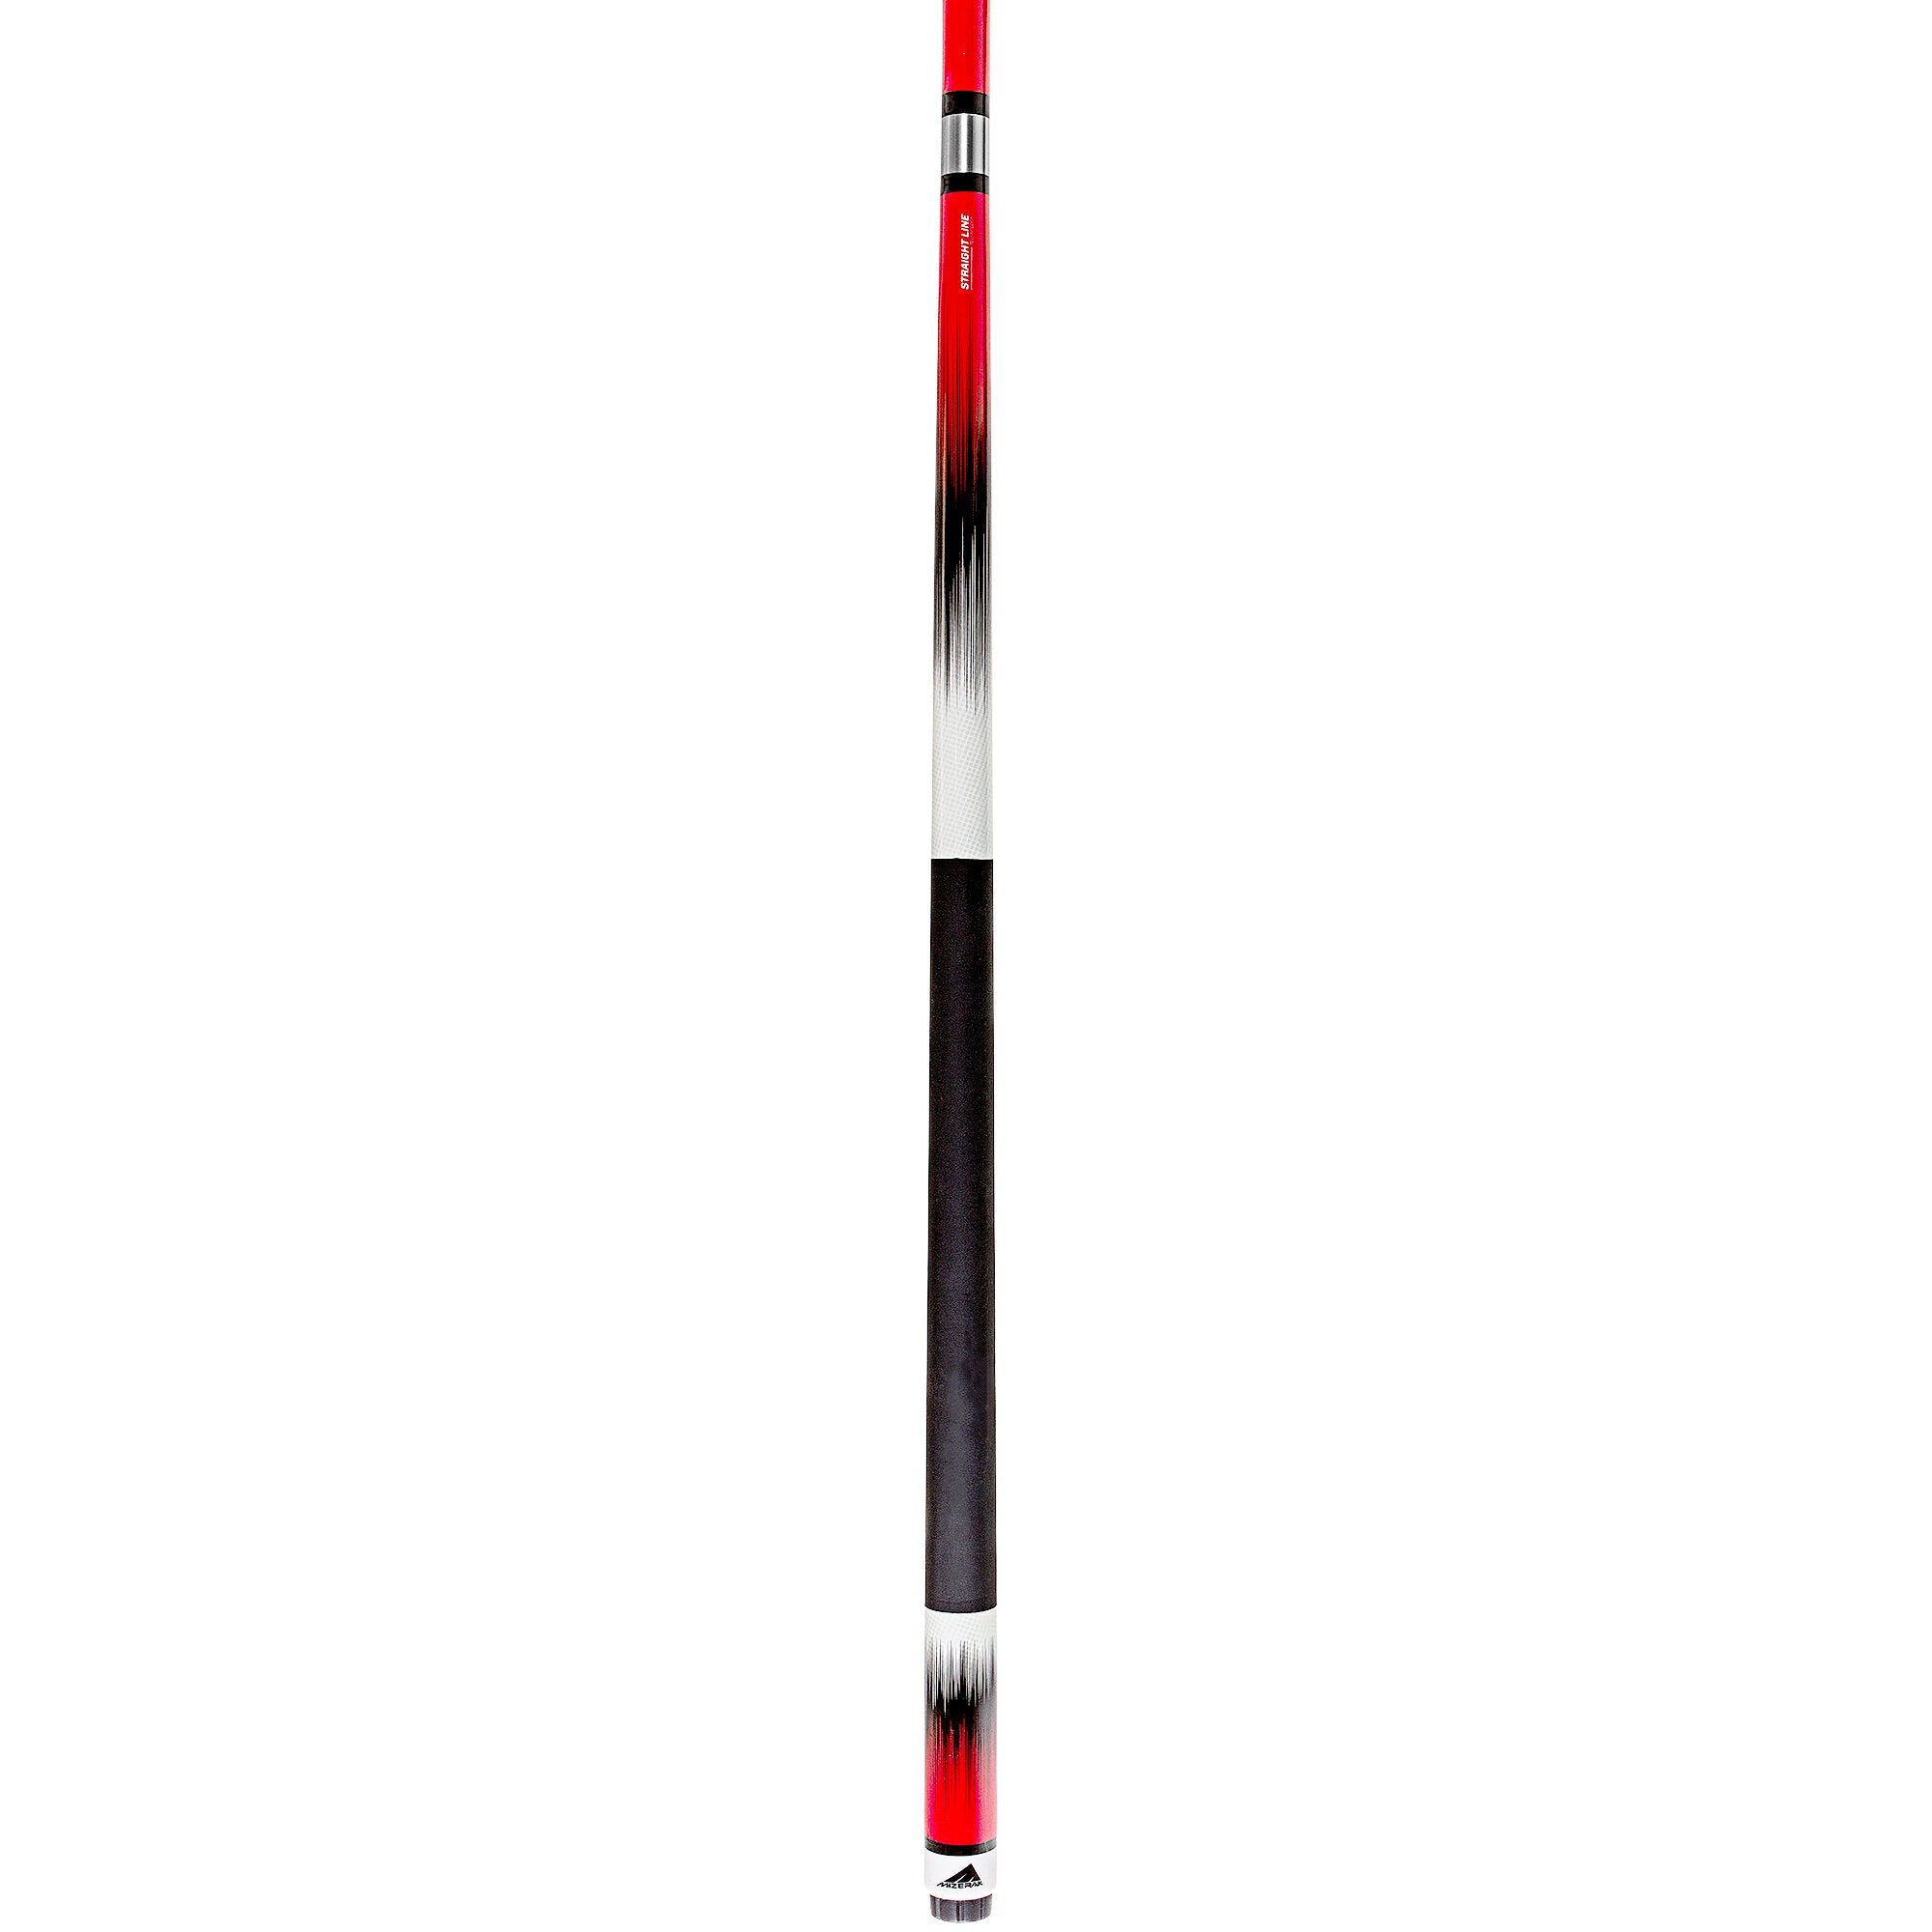 Mizerak P1881R 58" Two-Piece Neon Red Fade Deluxe Carbon Composite Billiard / Pool Cue with MicroTac Grip - P1881R